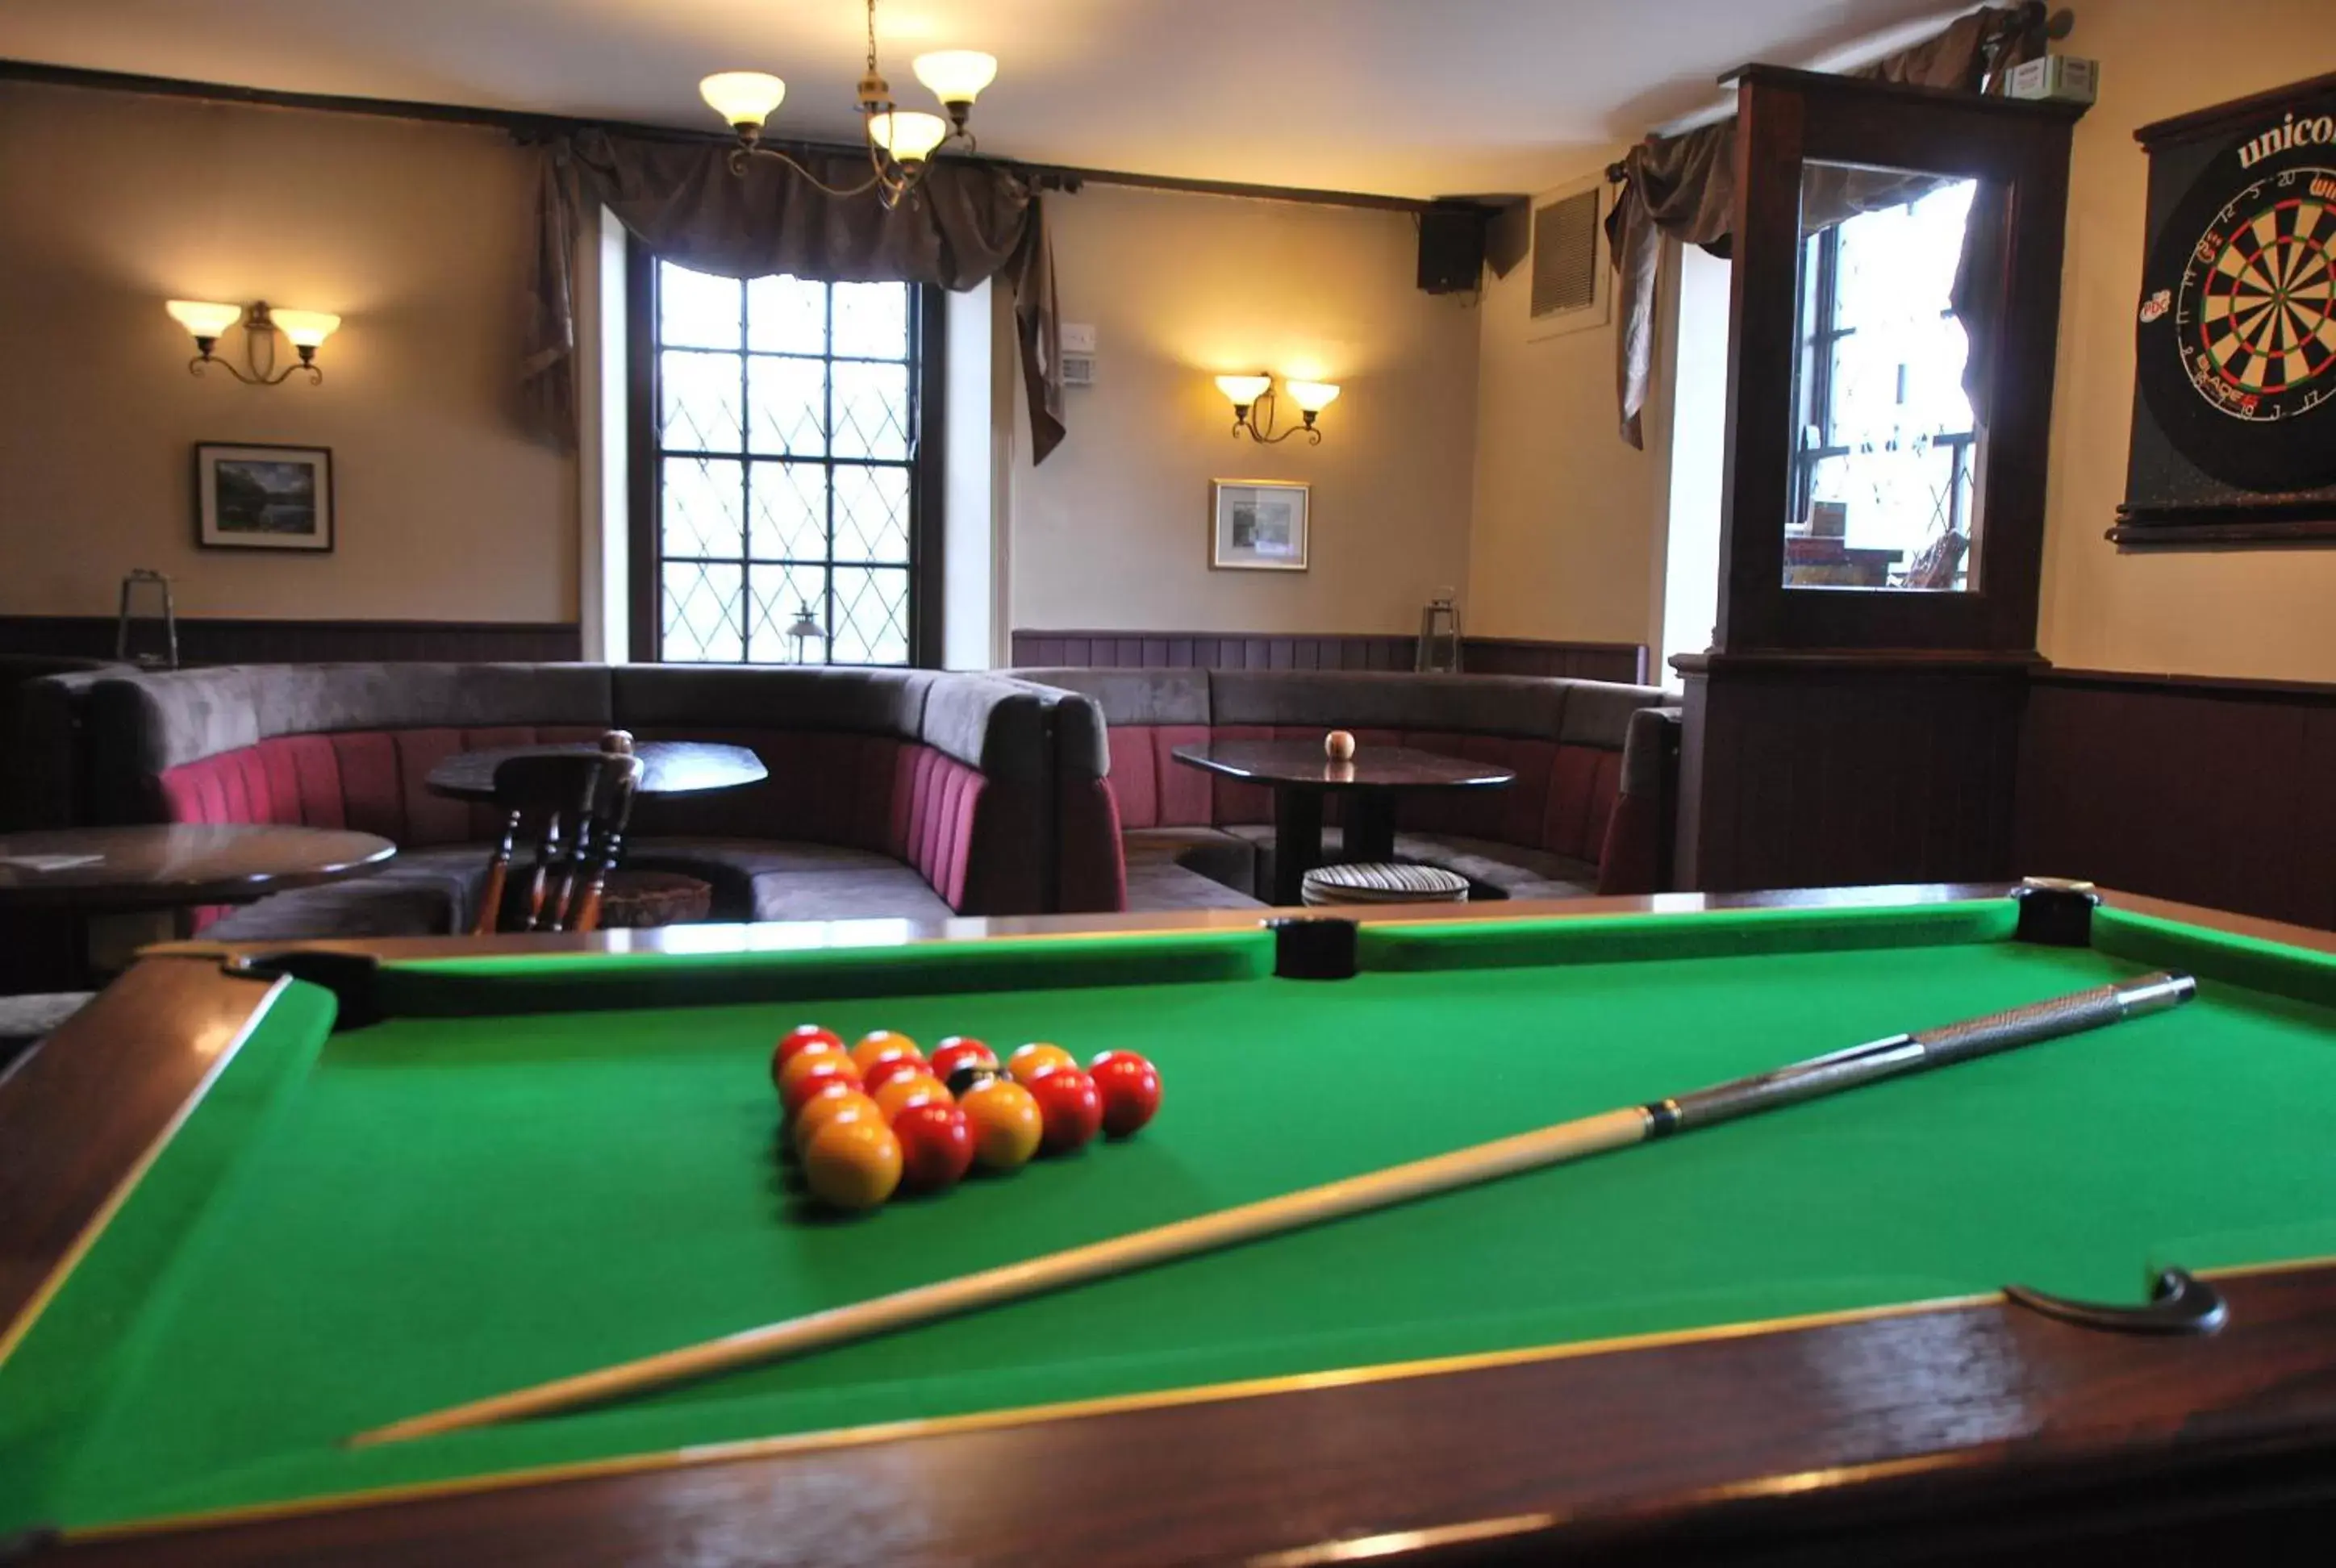 Lounge or bar, Billiards in the punchbowl hotel